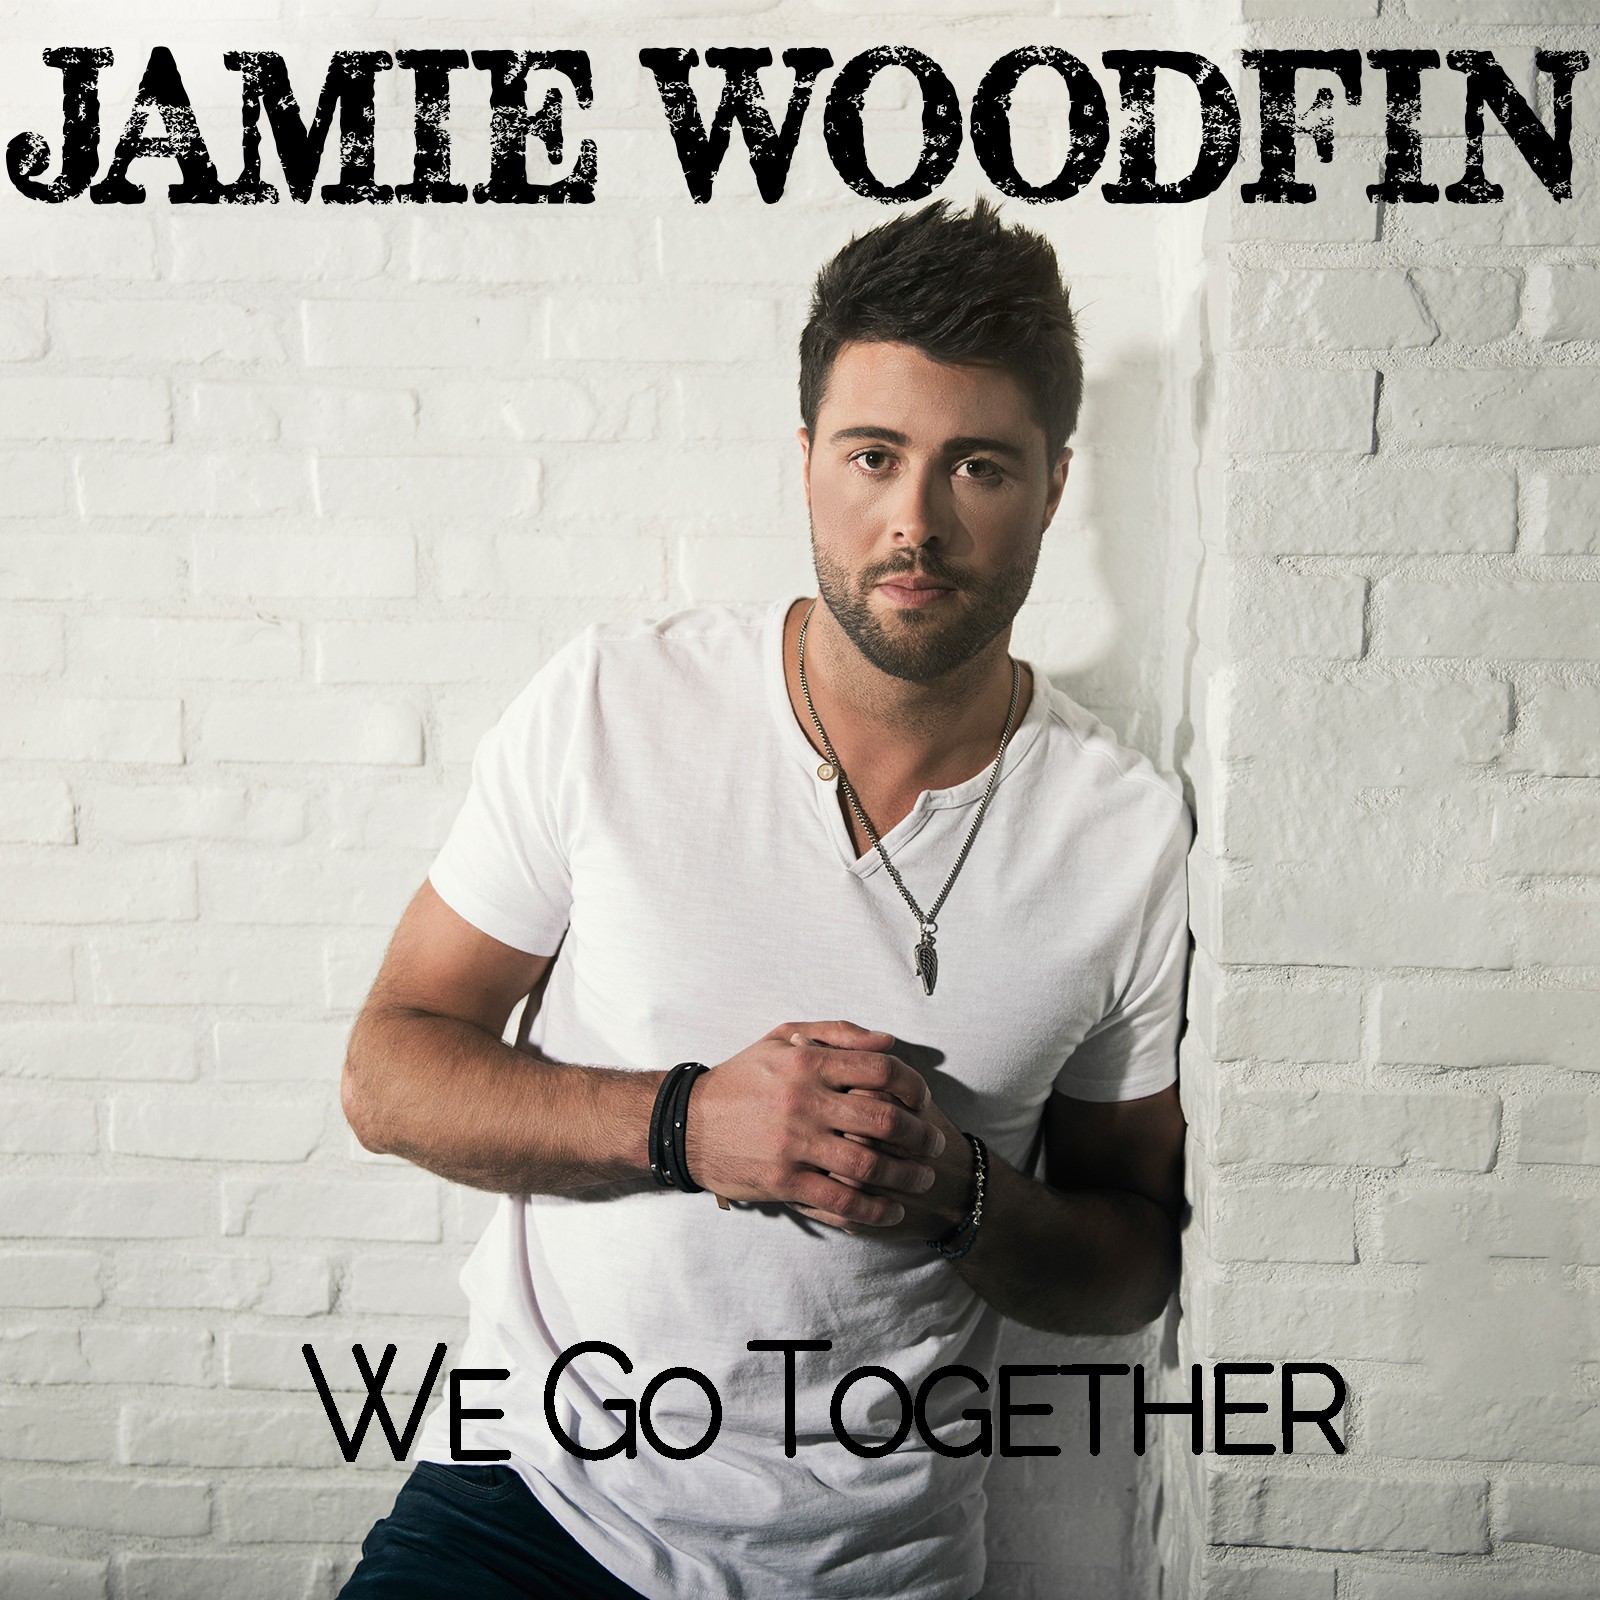 MOVING AHEAD - Local country singer Jamie Woodfin is excited to see the release of a brand new single this week. Woodfin has had an incredible year as he’s gaining a higher profile in his career journey.